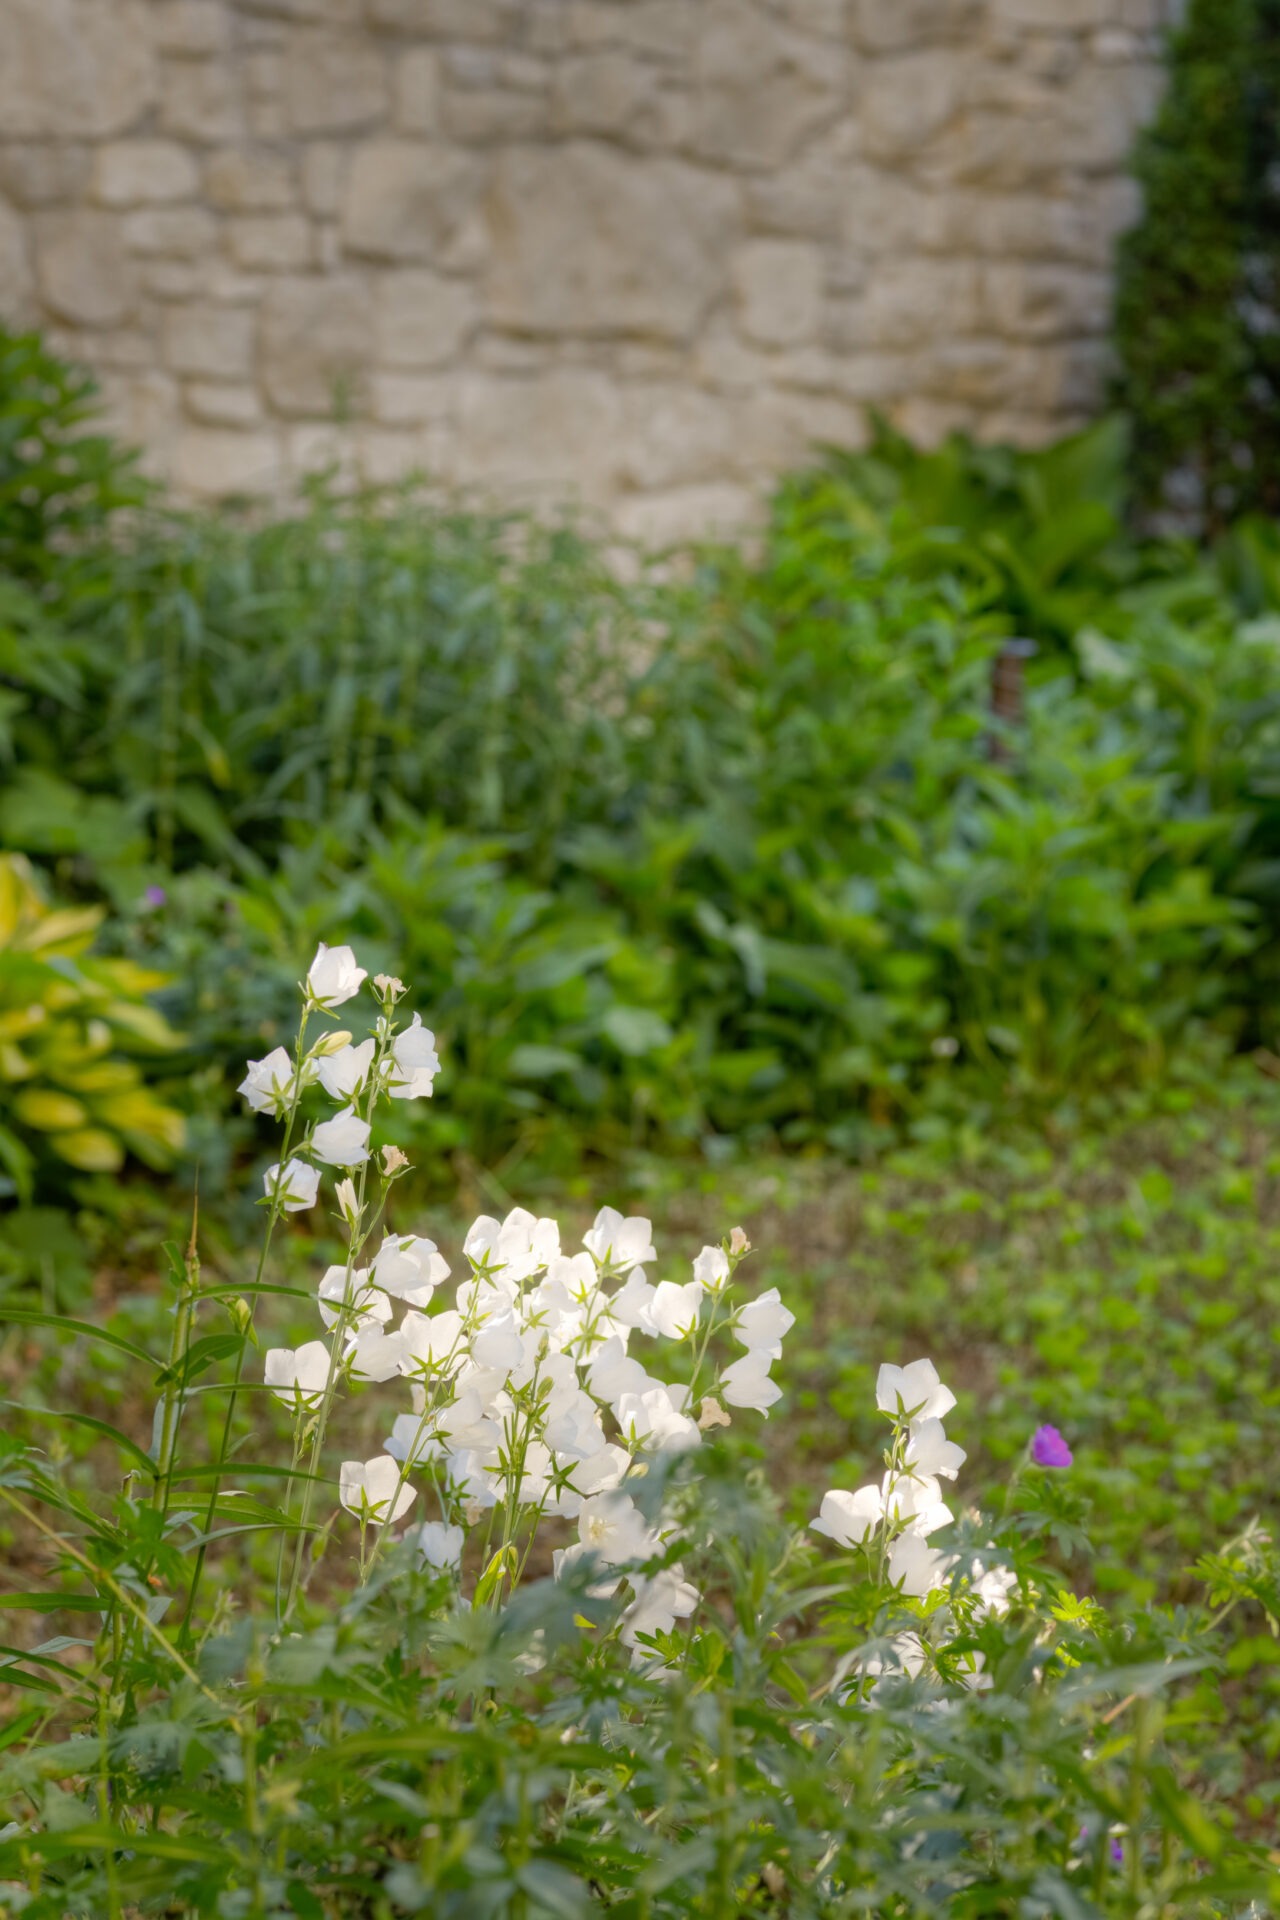 This image shows white bell-shaped flowers in focus, with a blurred garden and stone wall in the background, conveying a tranquil natural setting.